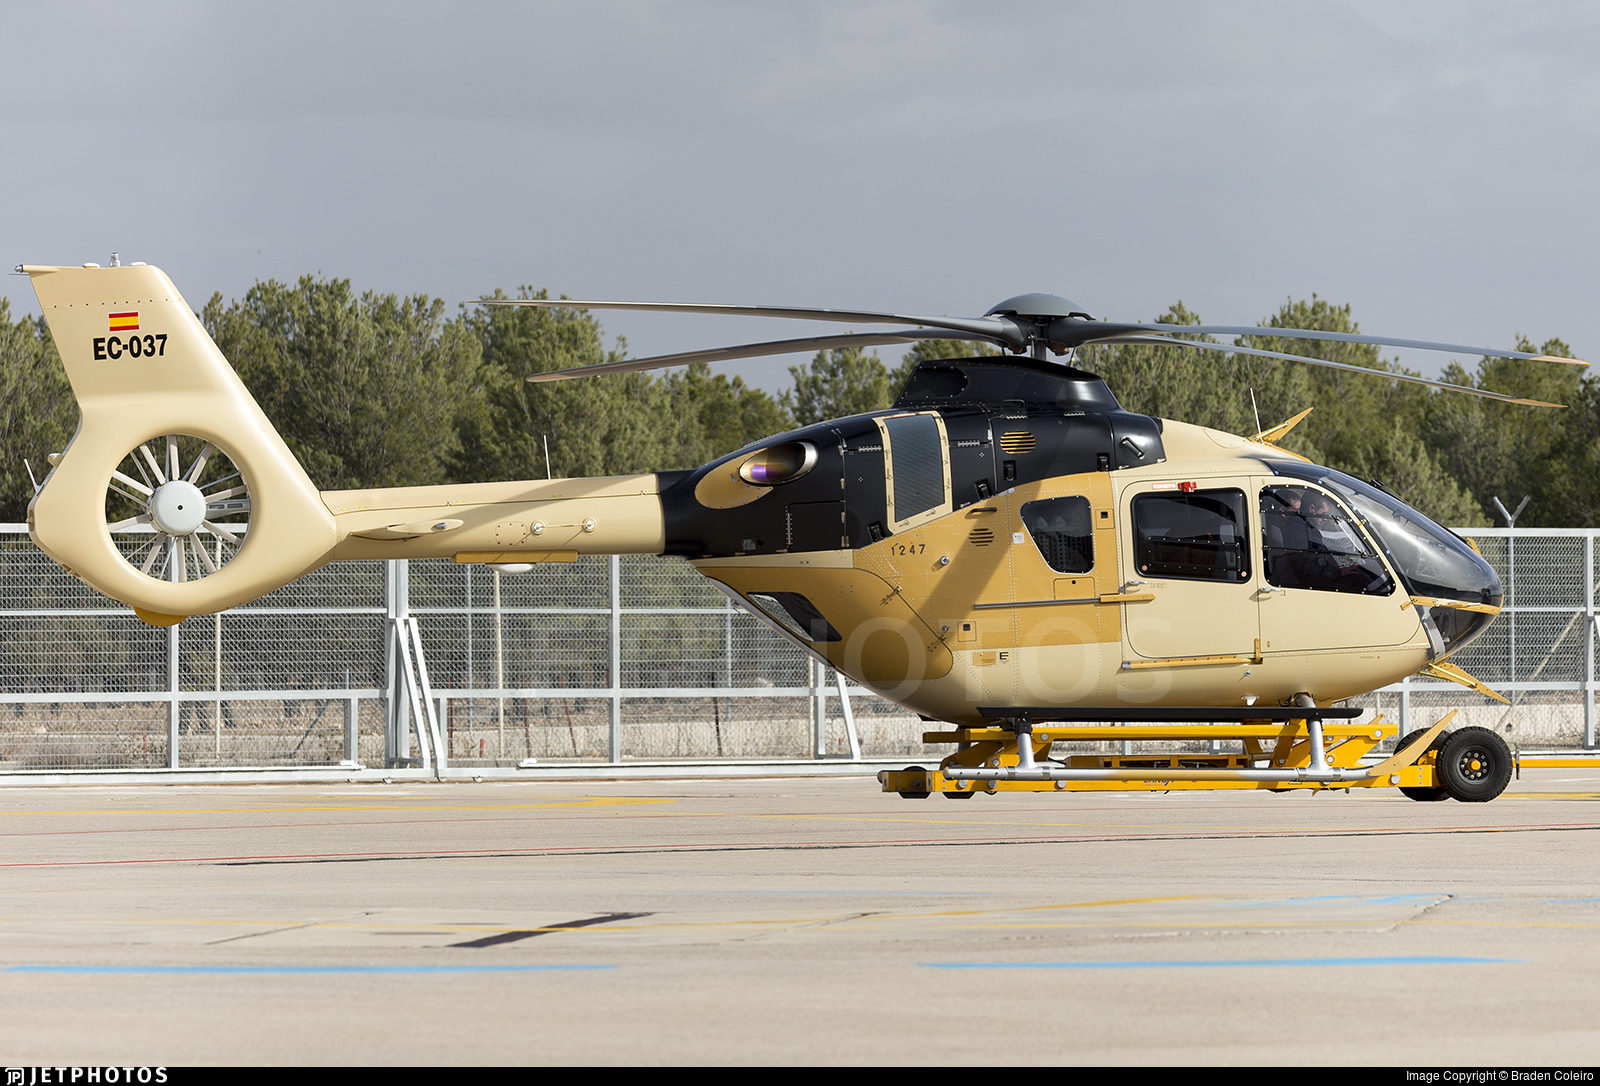 h135 helicopter